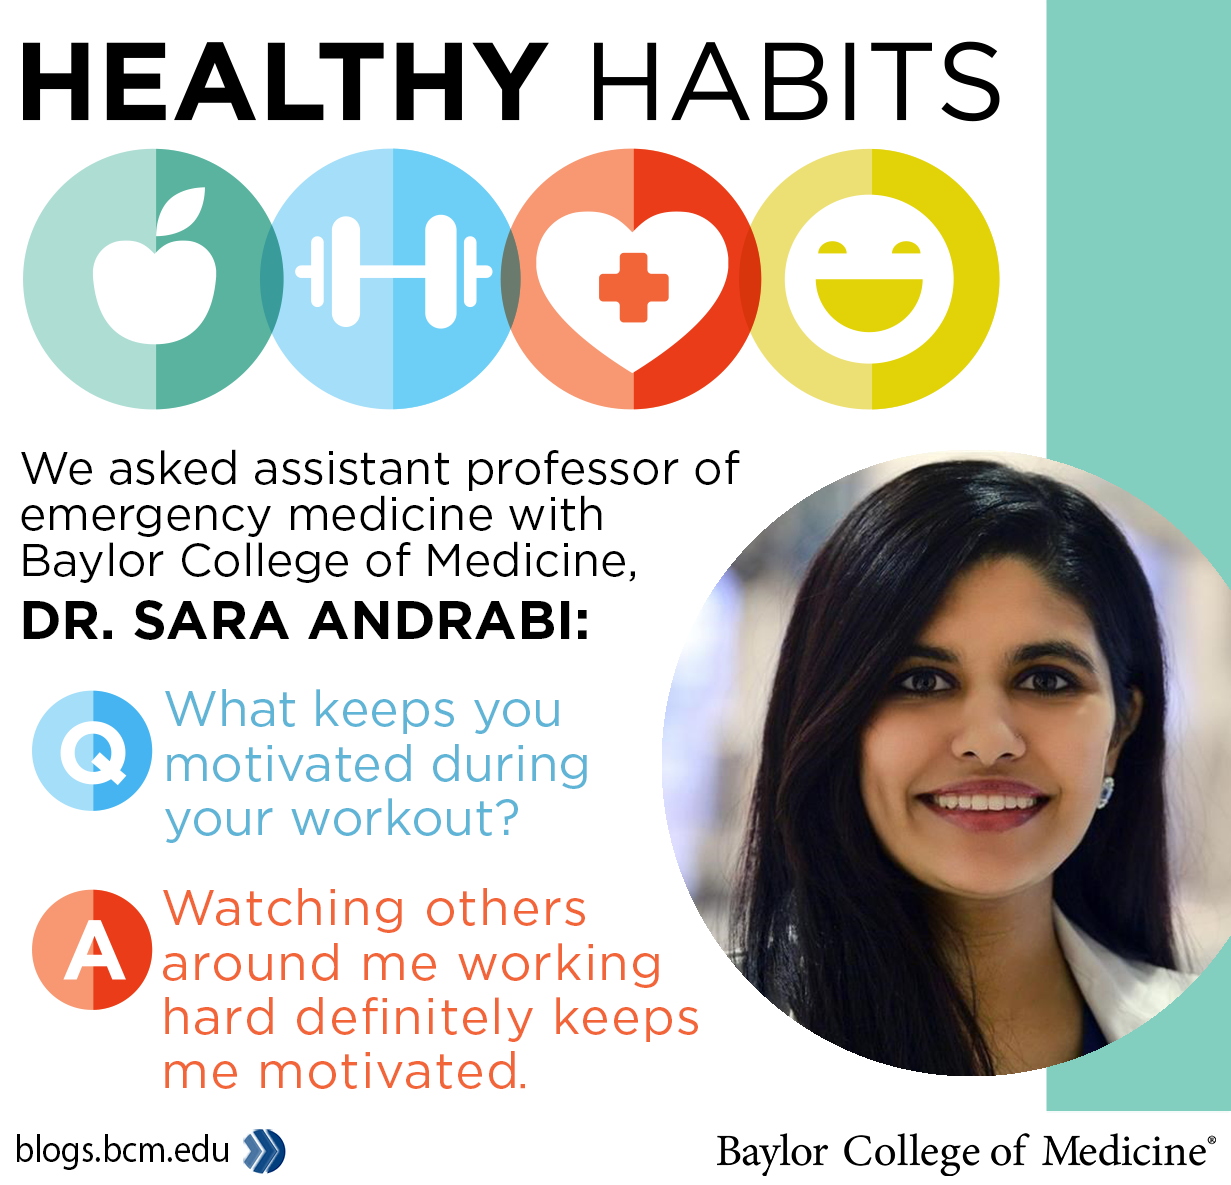 A question for Dr. Sara Andrabi: What is your favorite healthful snack? Answer: I love yogurt. I like to eat plain Greek yogurt with raspberries and strawberries.